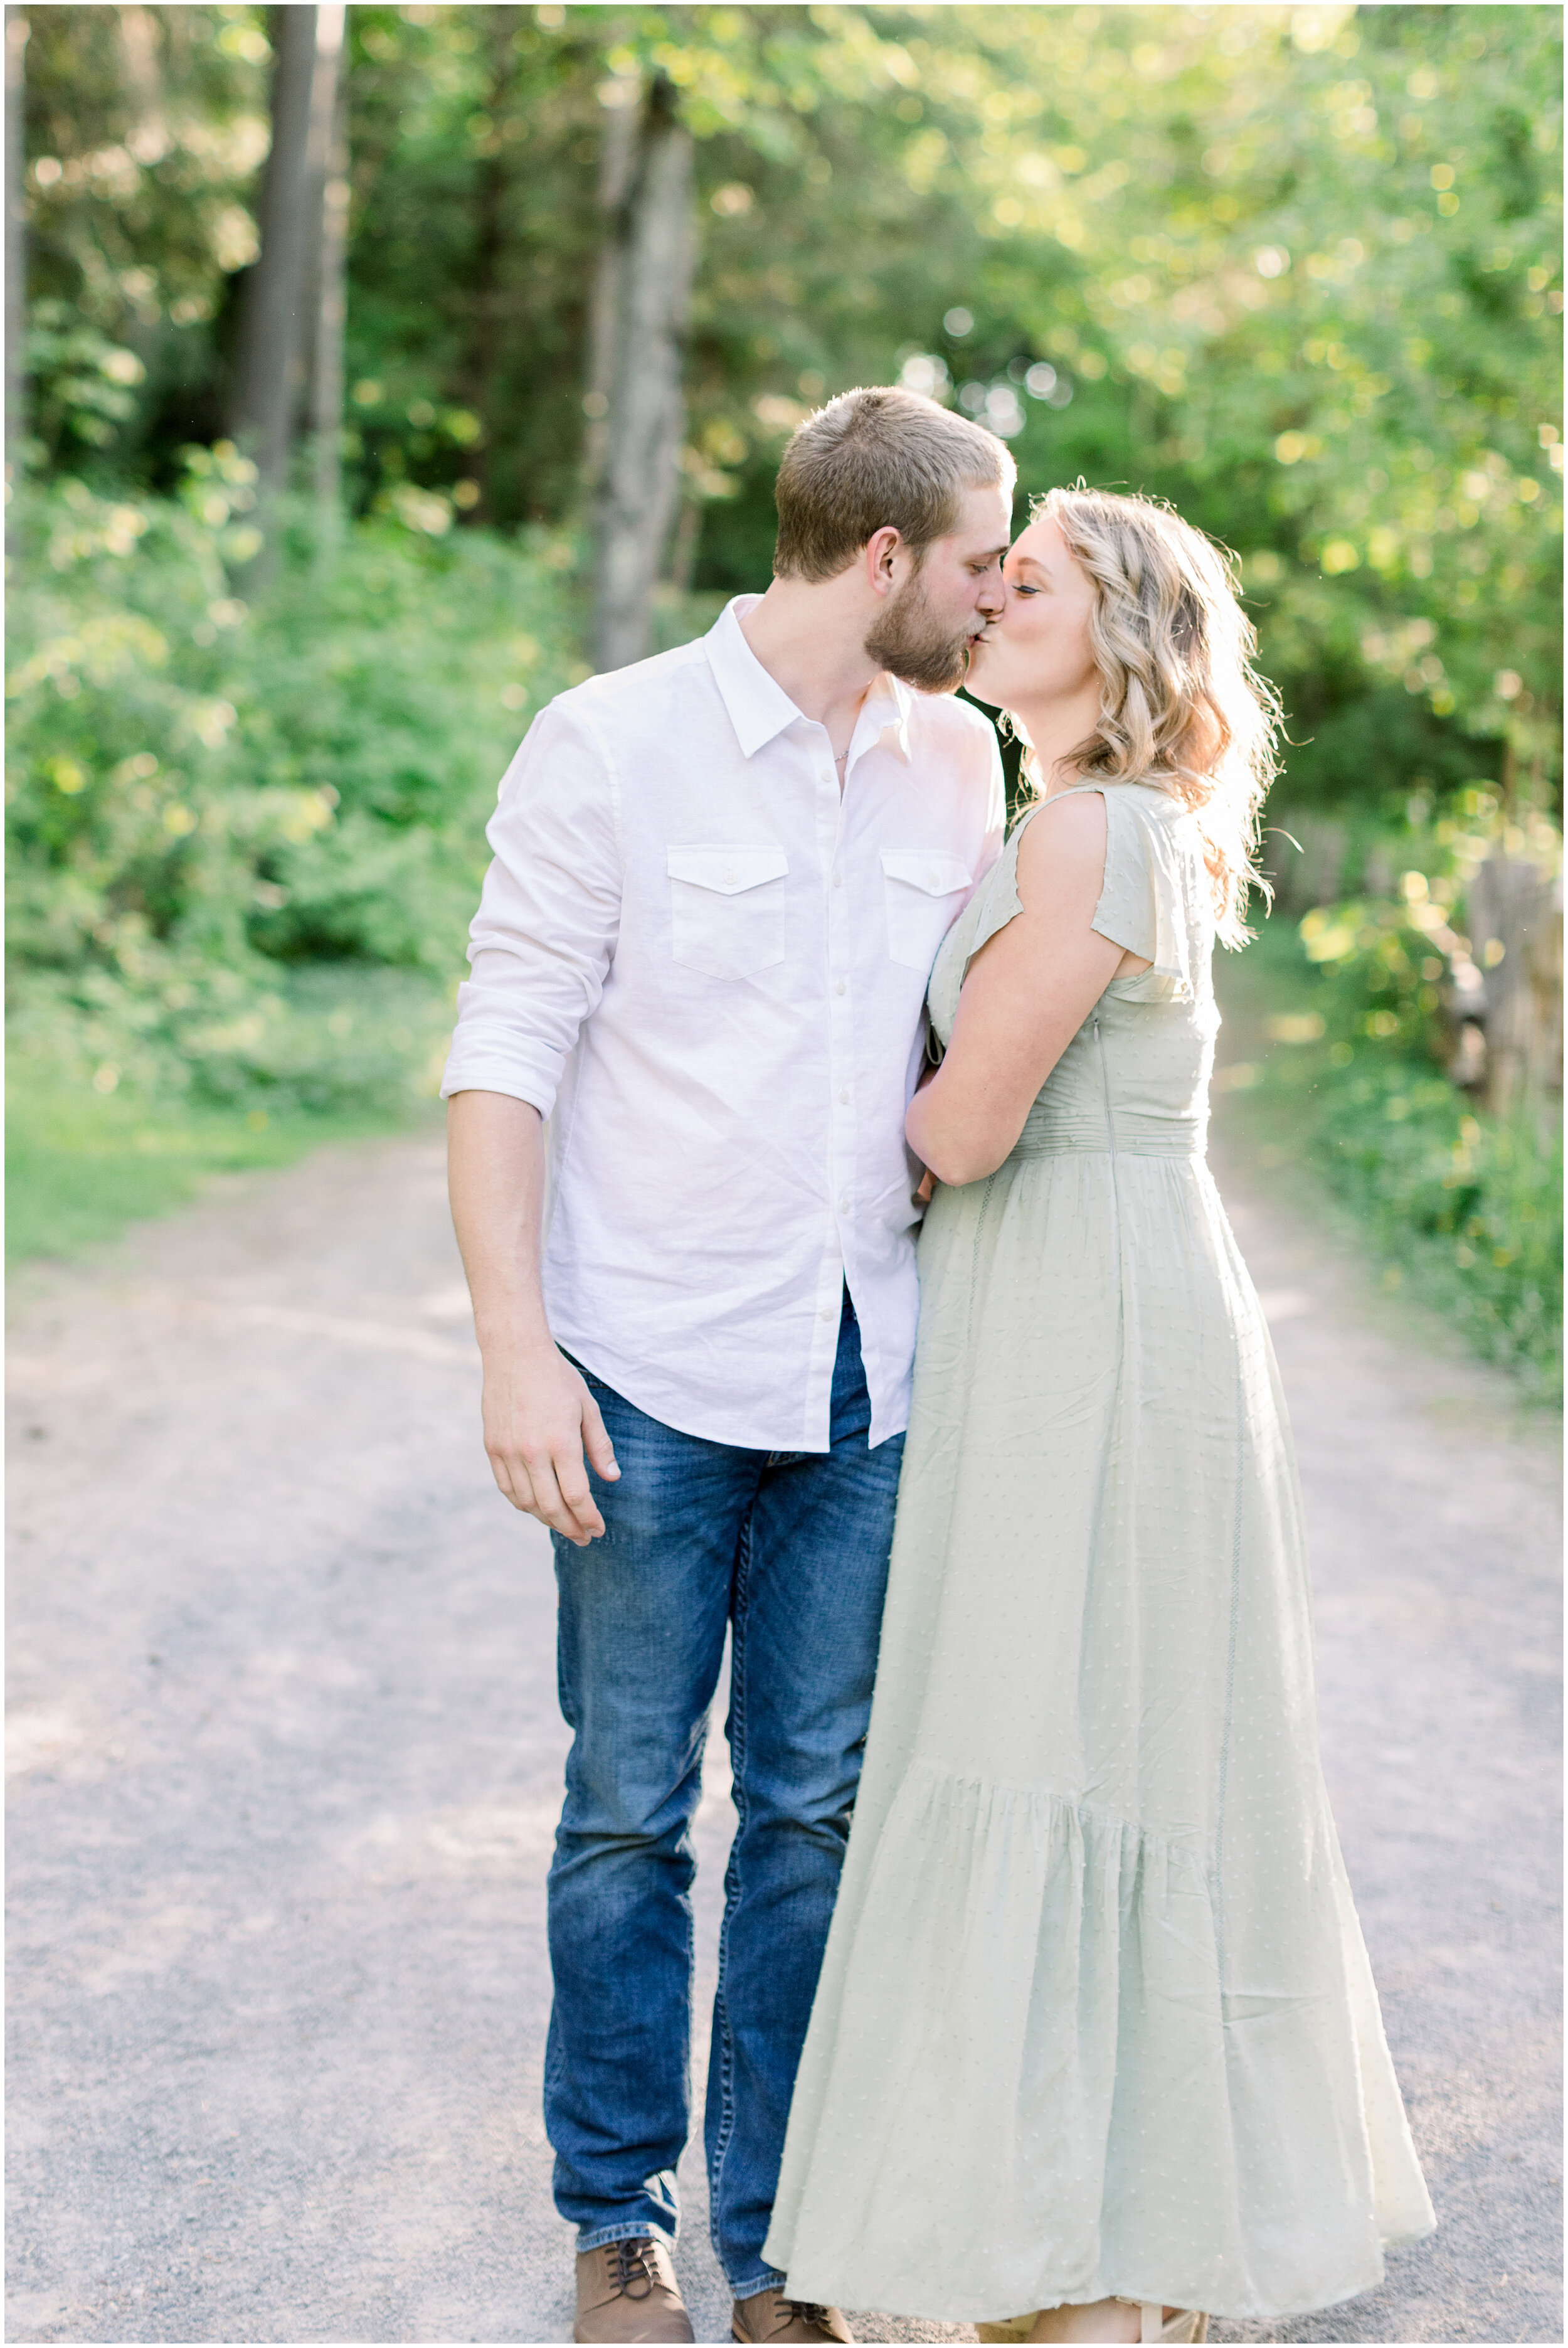 mill_of_kintail_engagementsession_jo-4.jpg